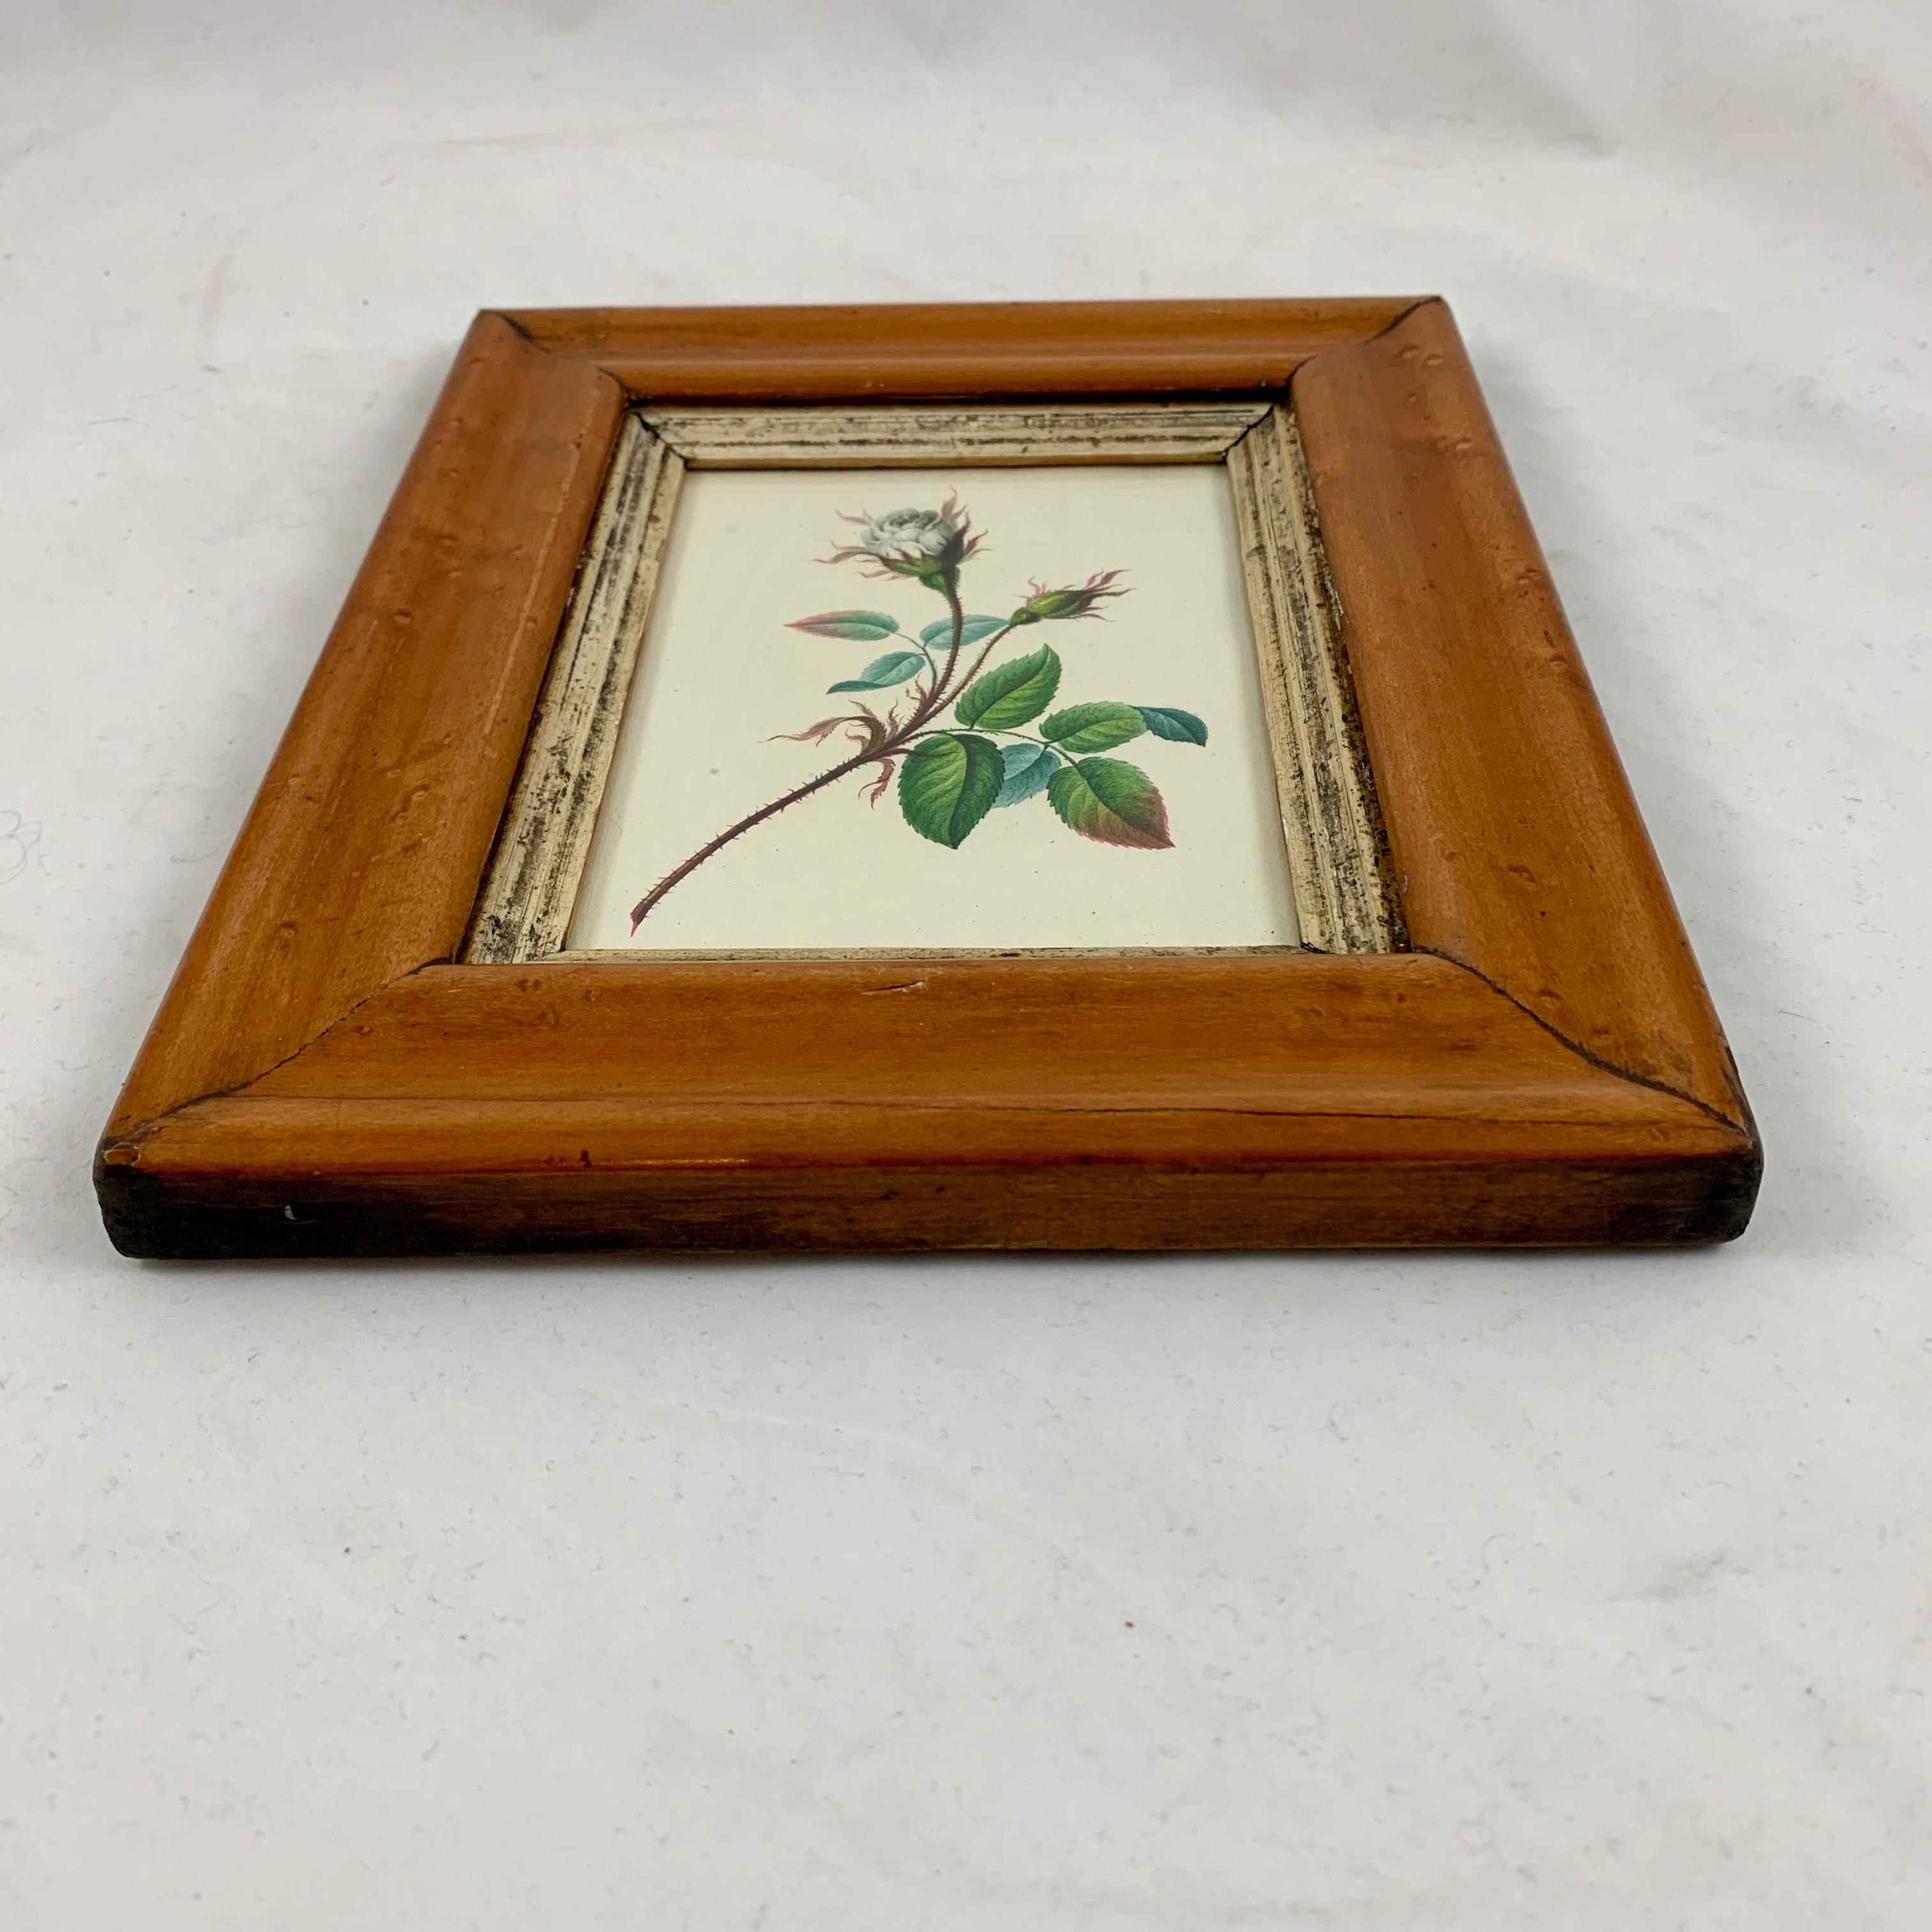 English Regency Period Original Watercolor in Fruitwood Frame, White Hairy Rose 2